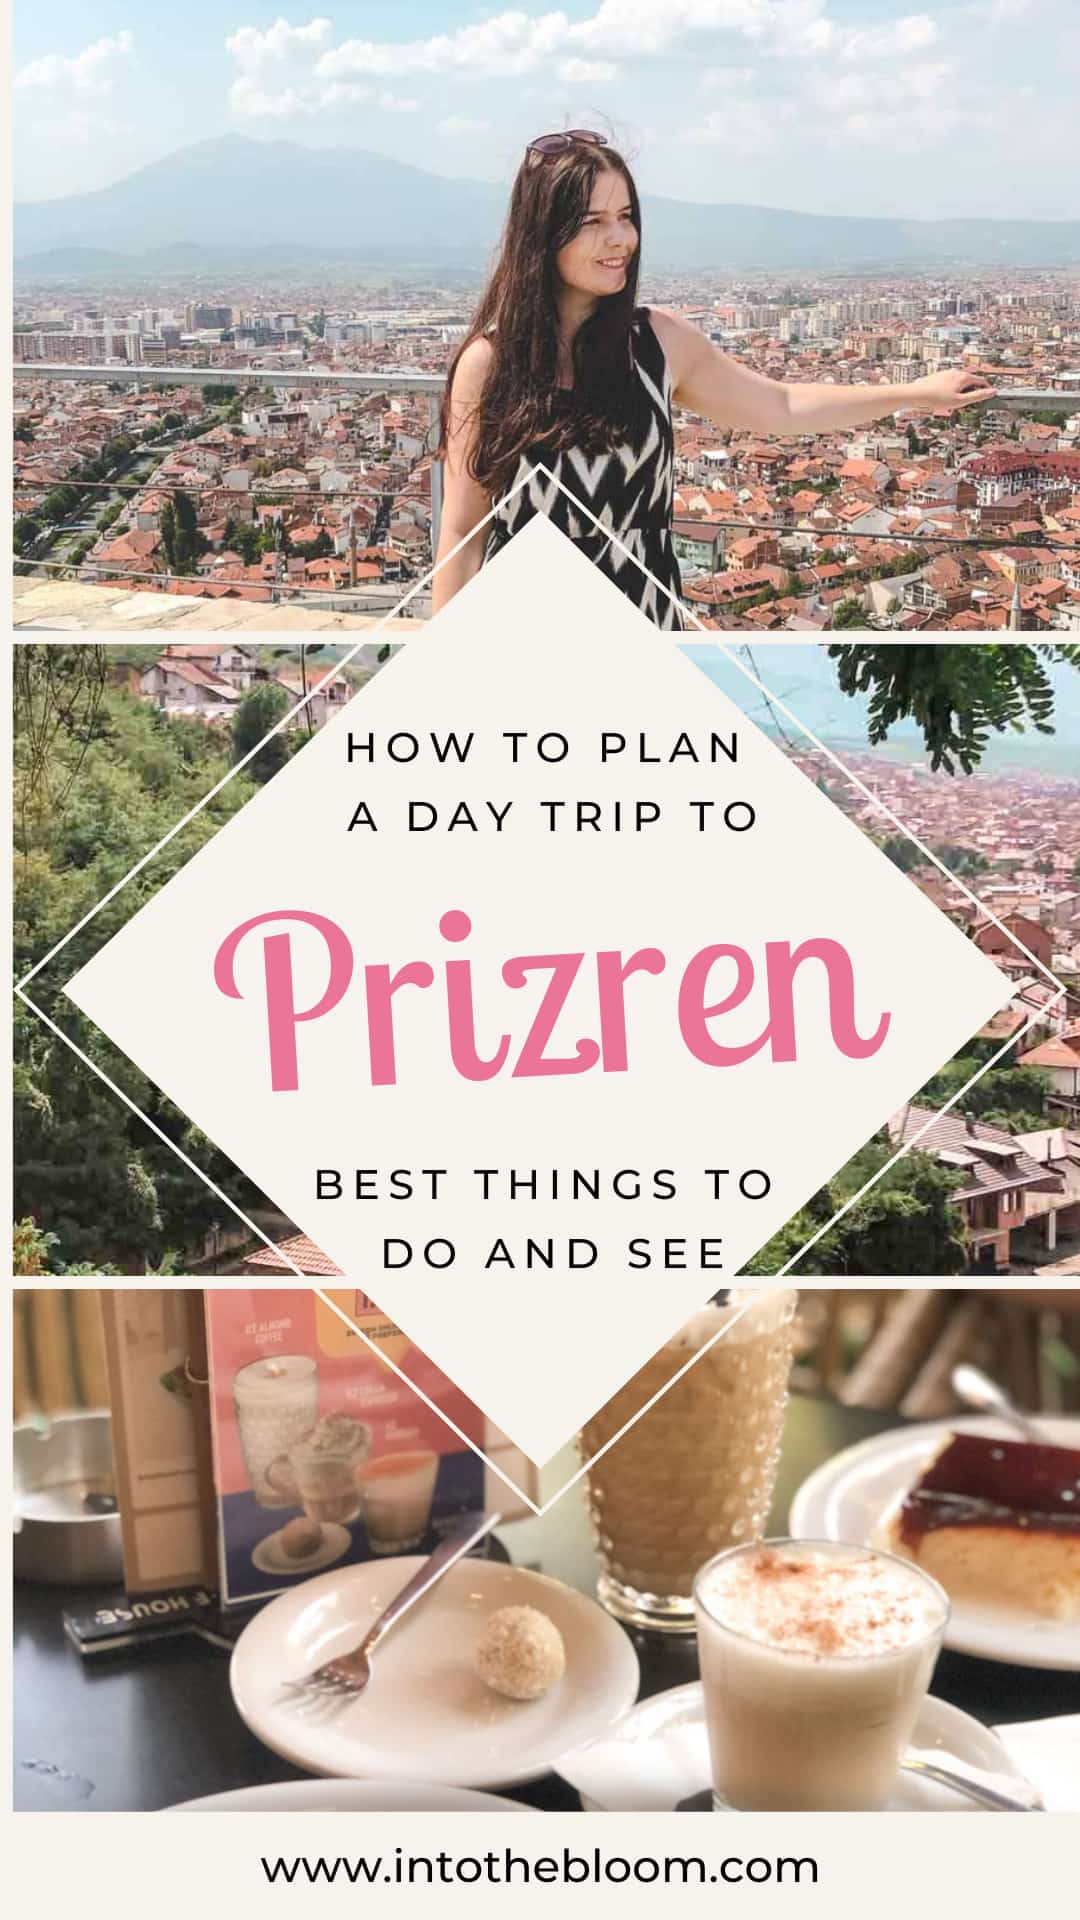 How to plan a day trip to Prizren, Kosovo - Best things to do and see